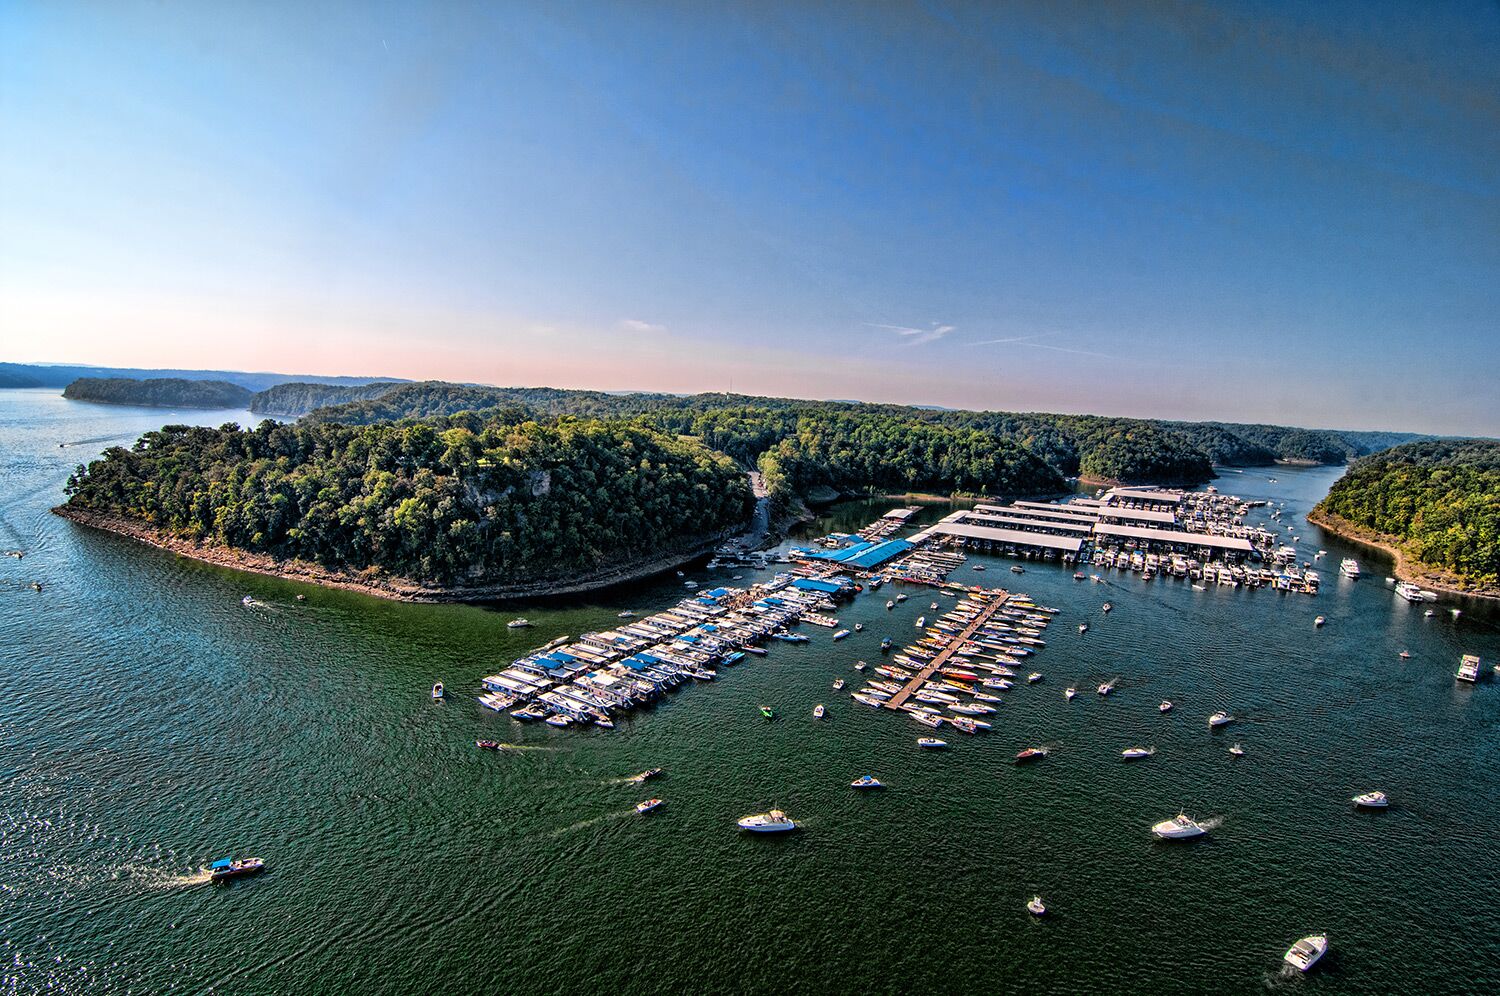 Vacationing At Lake Cumberland Can Be Filled With Fun Raymond M